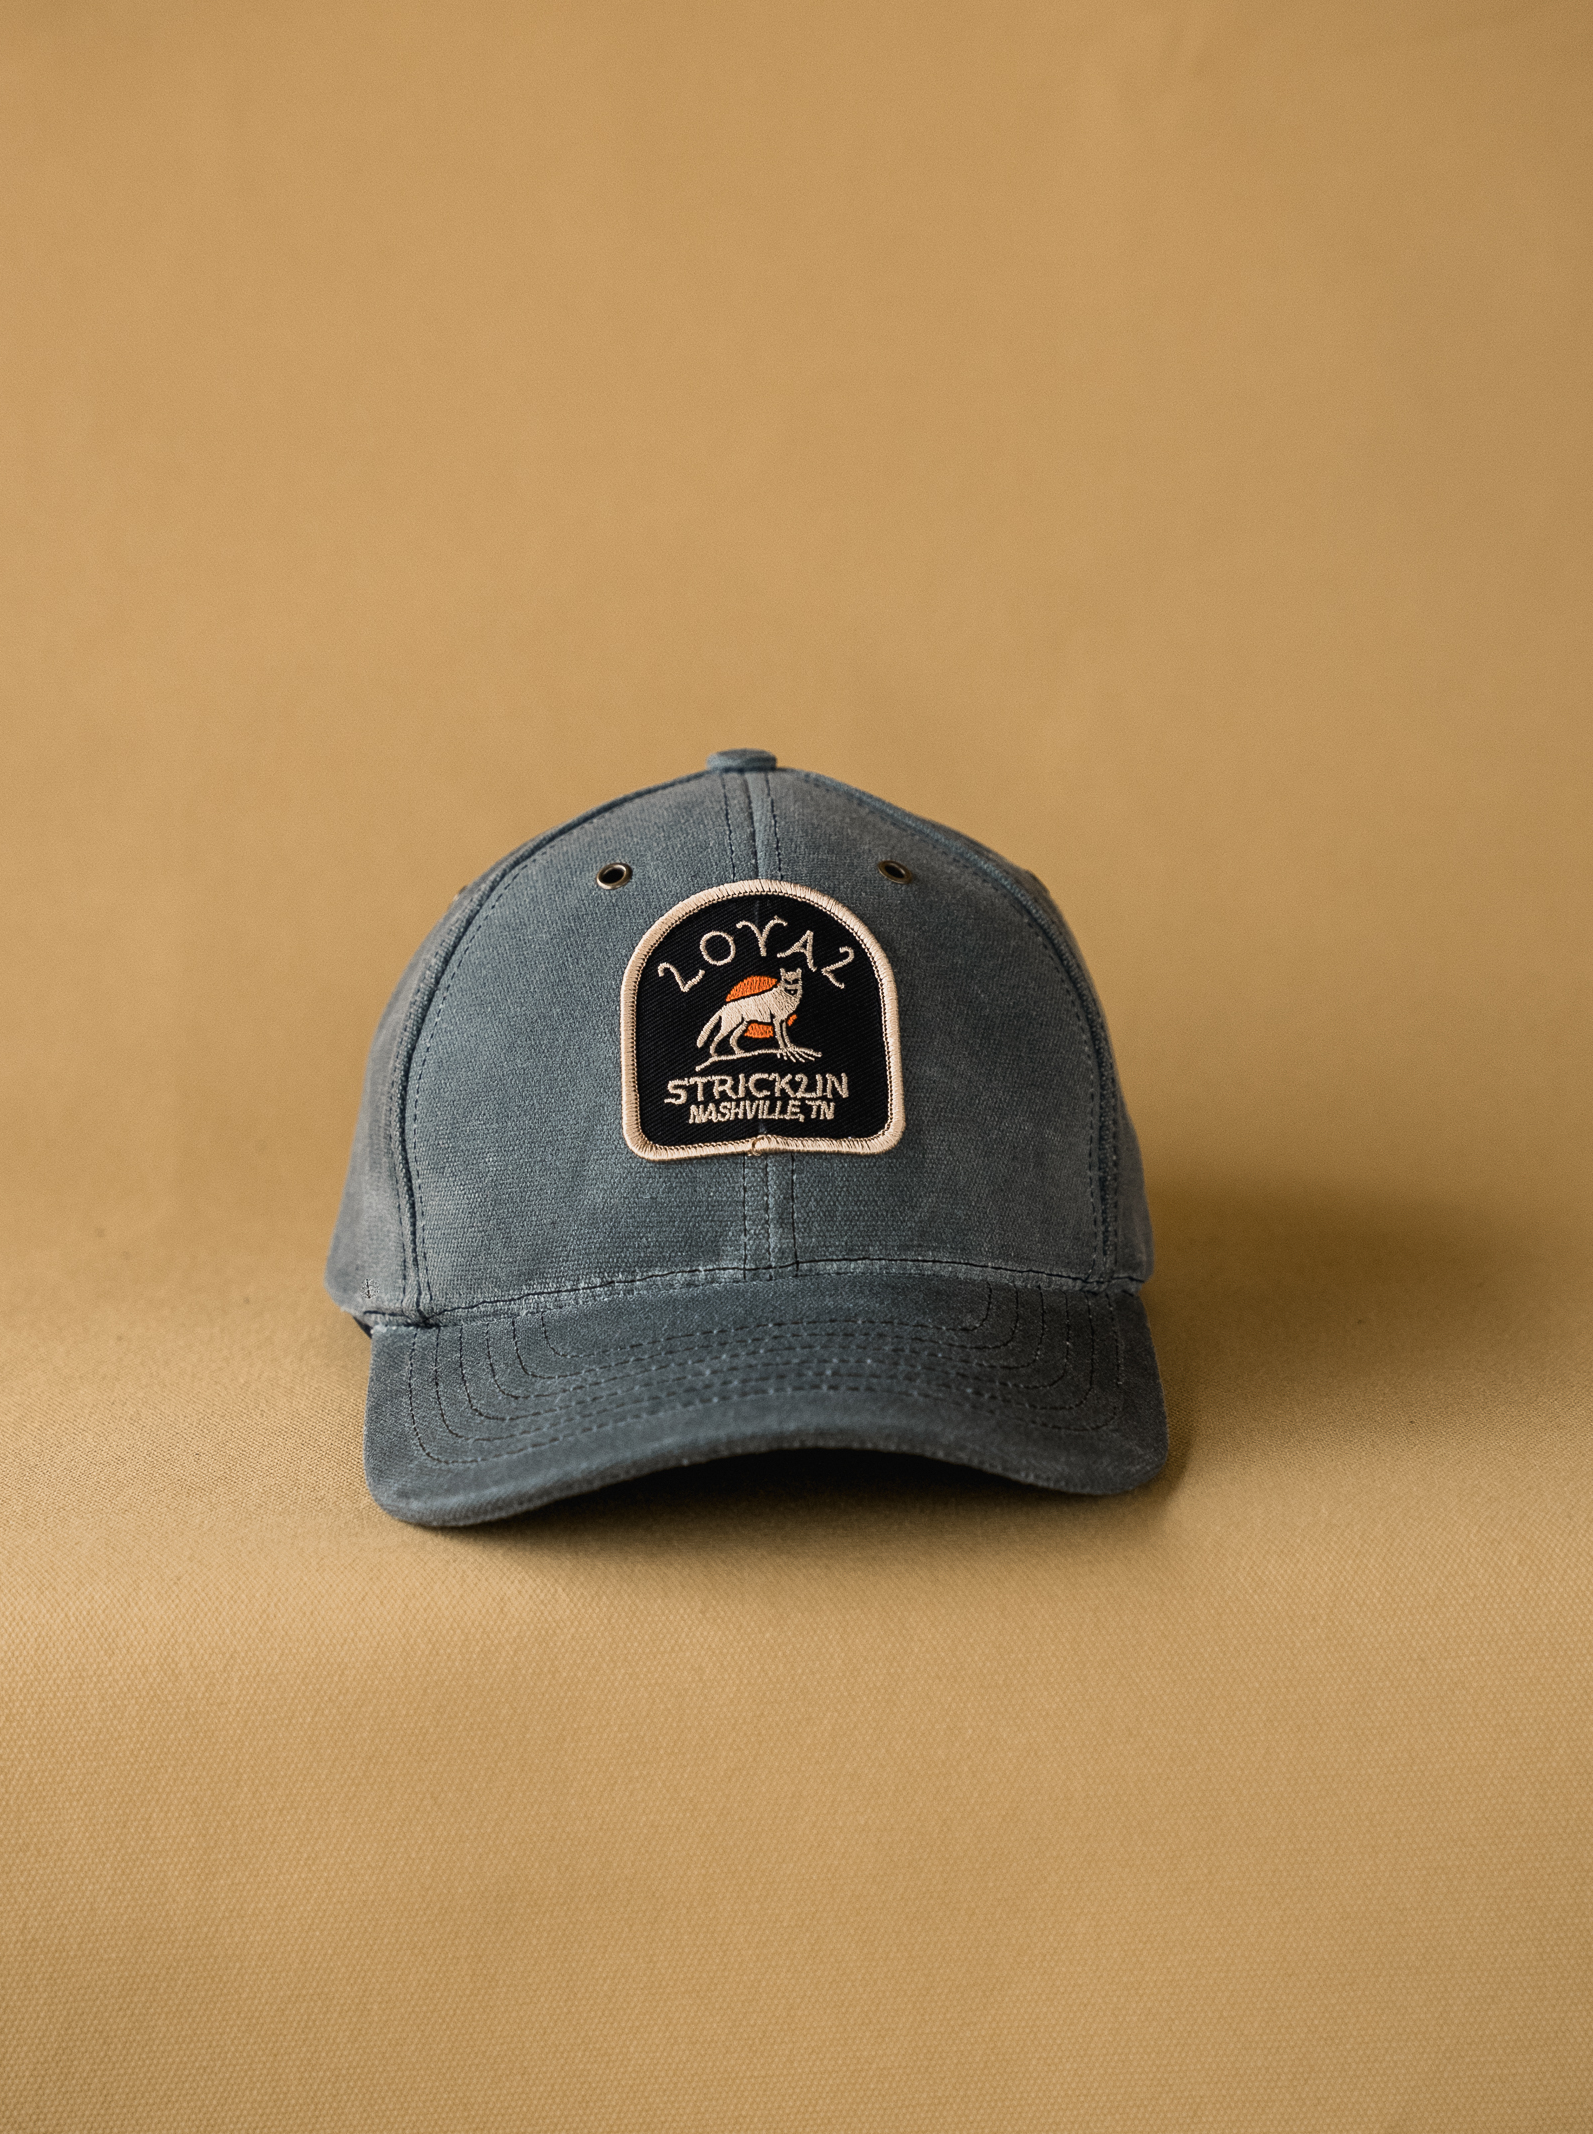 Waxed Canvas Baseball Hat - Charcoal Wolf Patch